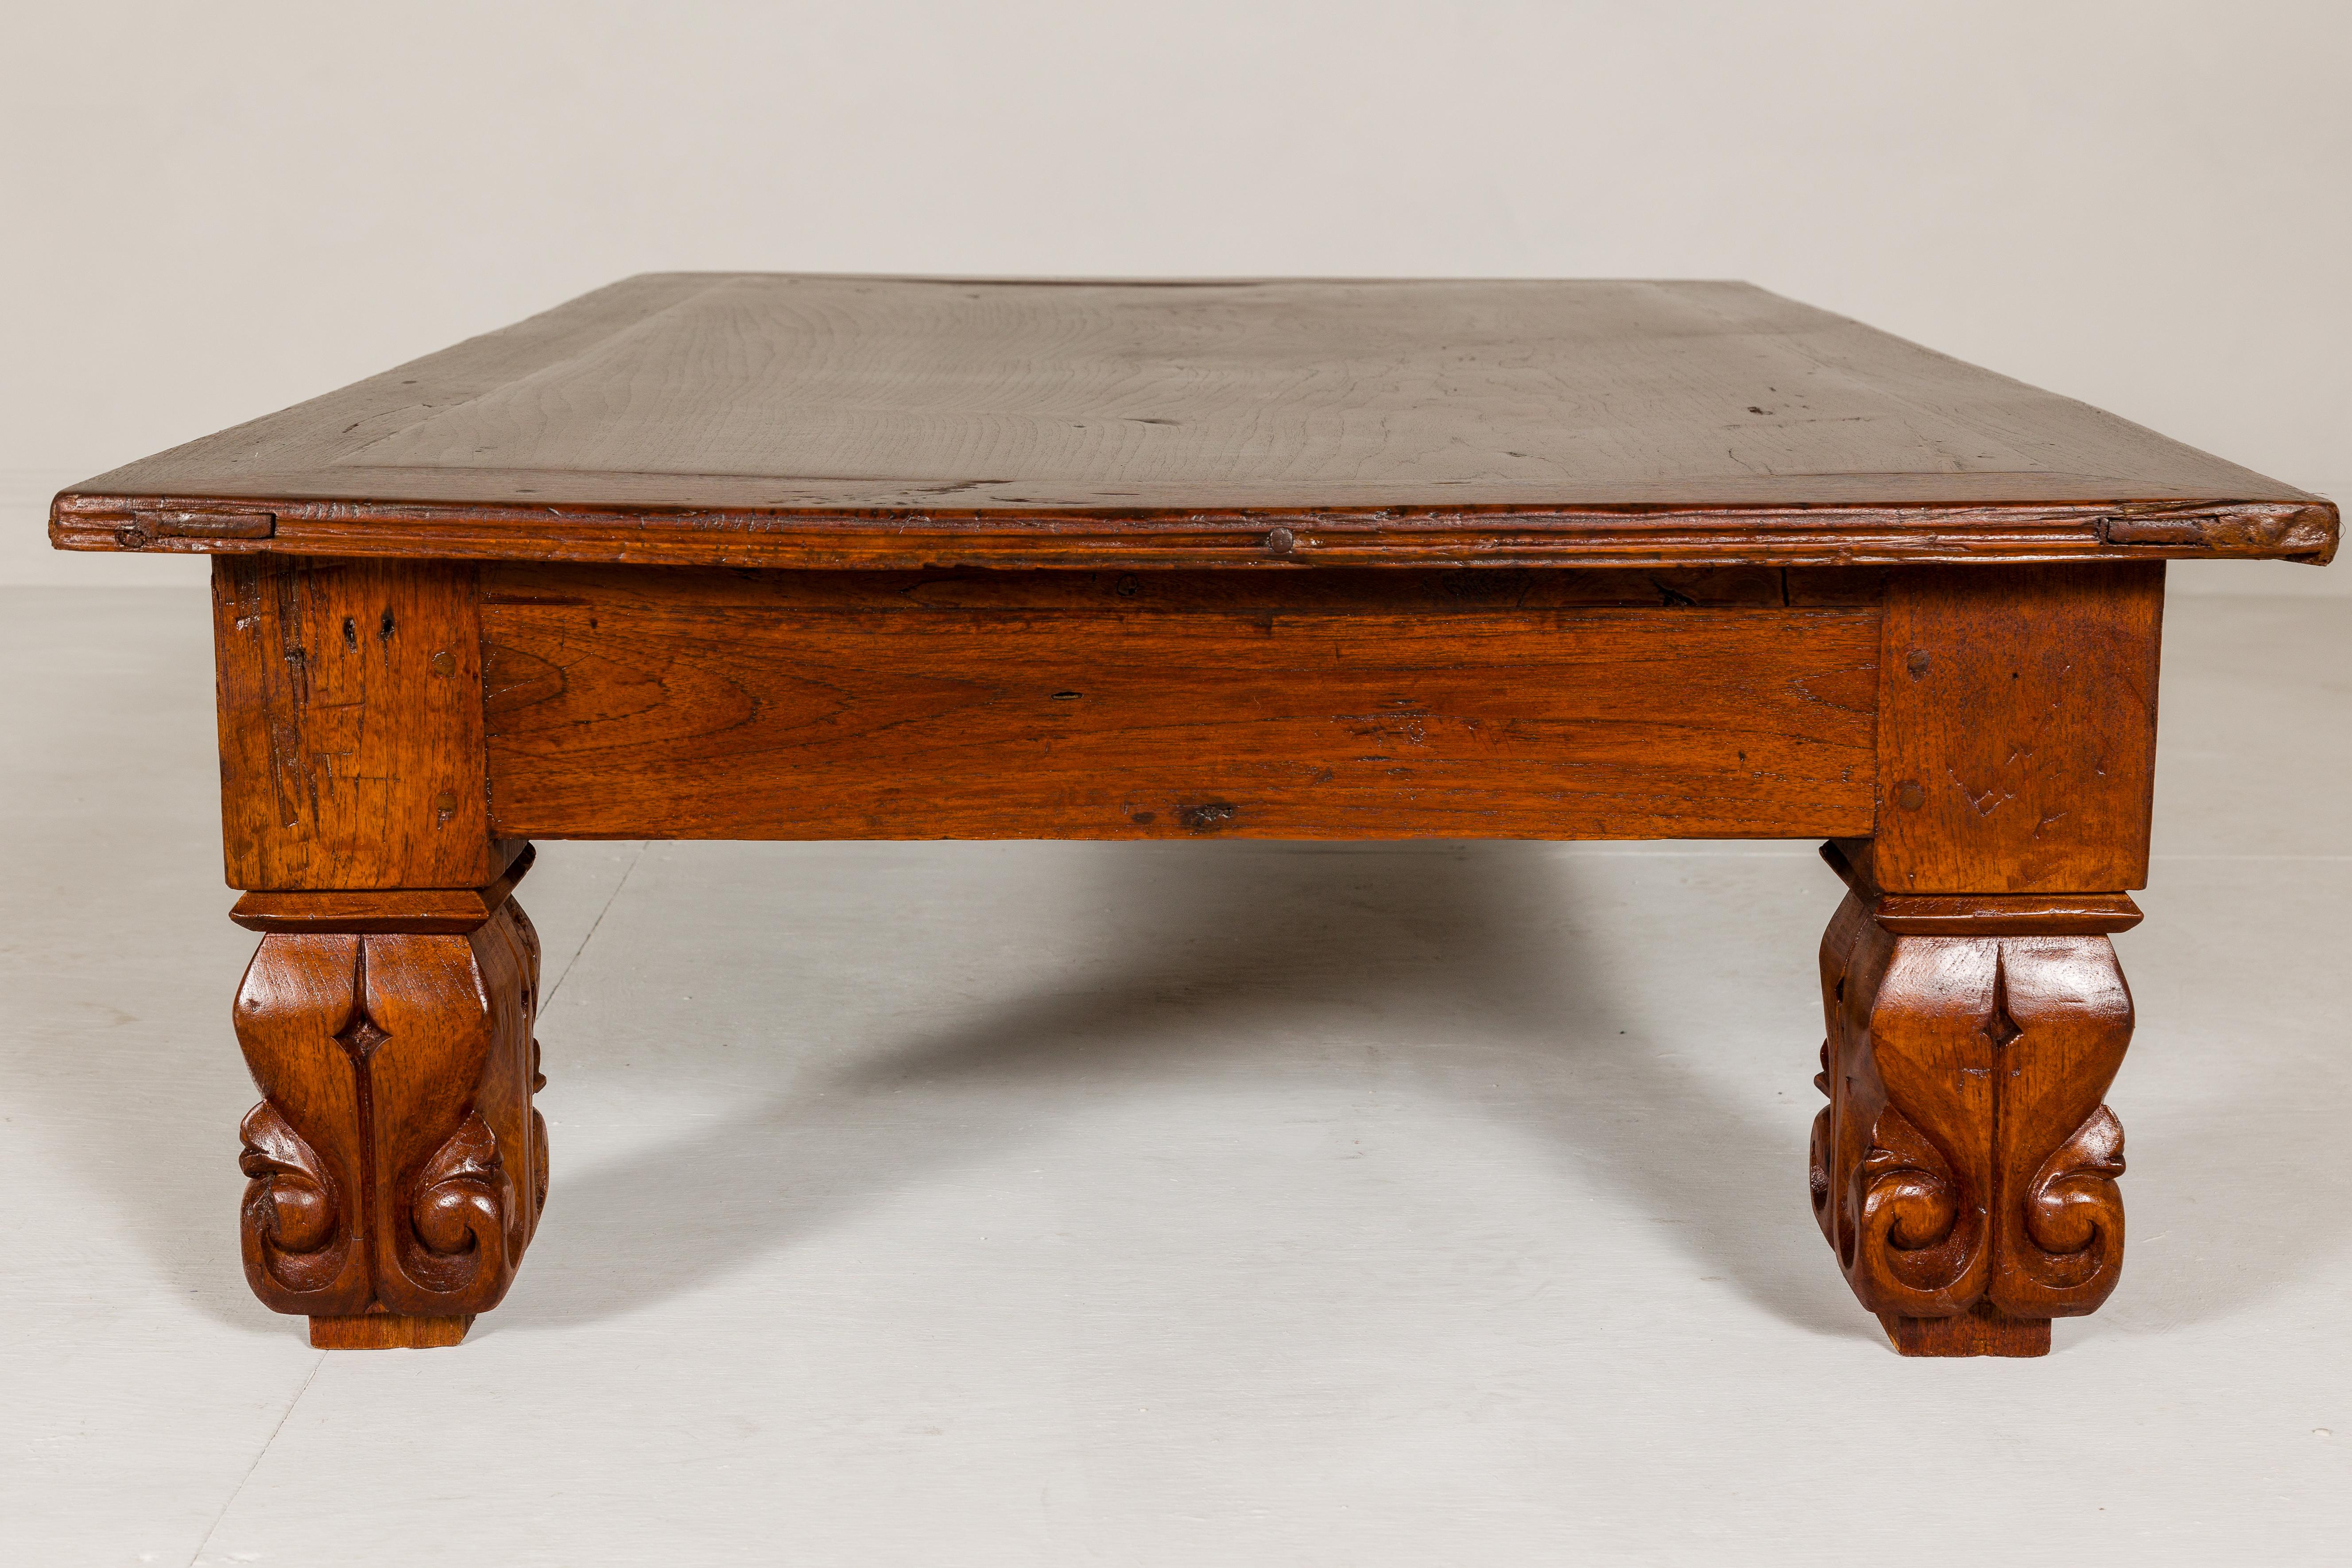 19th Century Teak Brown Wood Low Coffee Table with Scroll Carved Legs For Sale 11